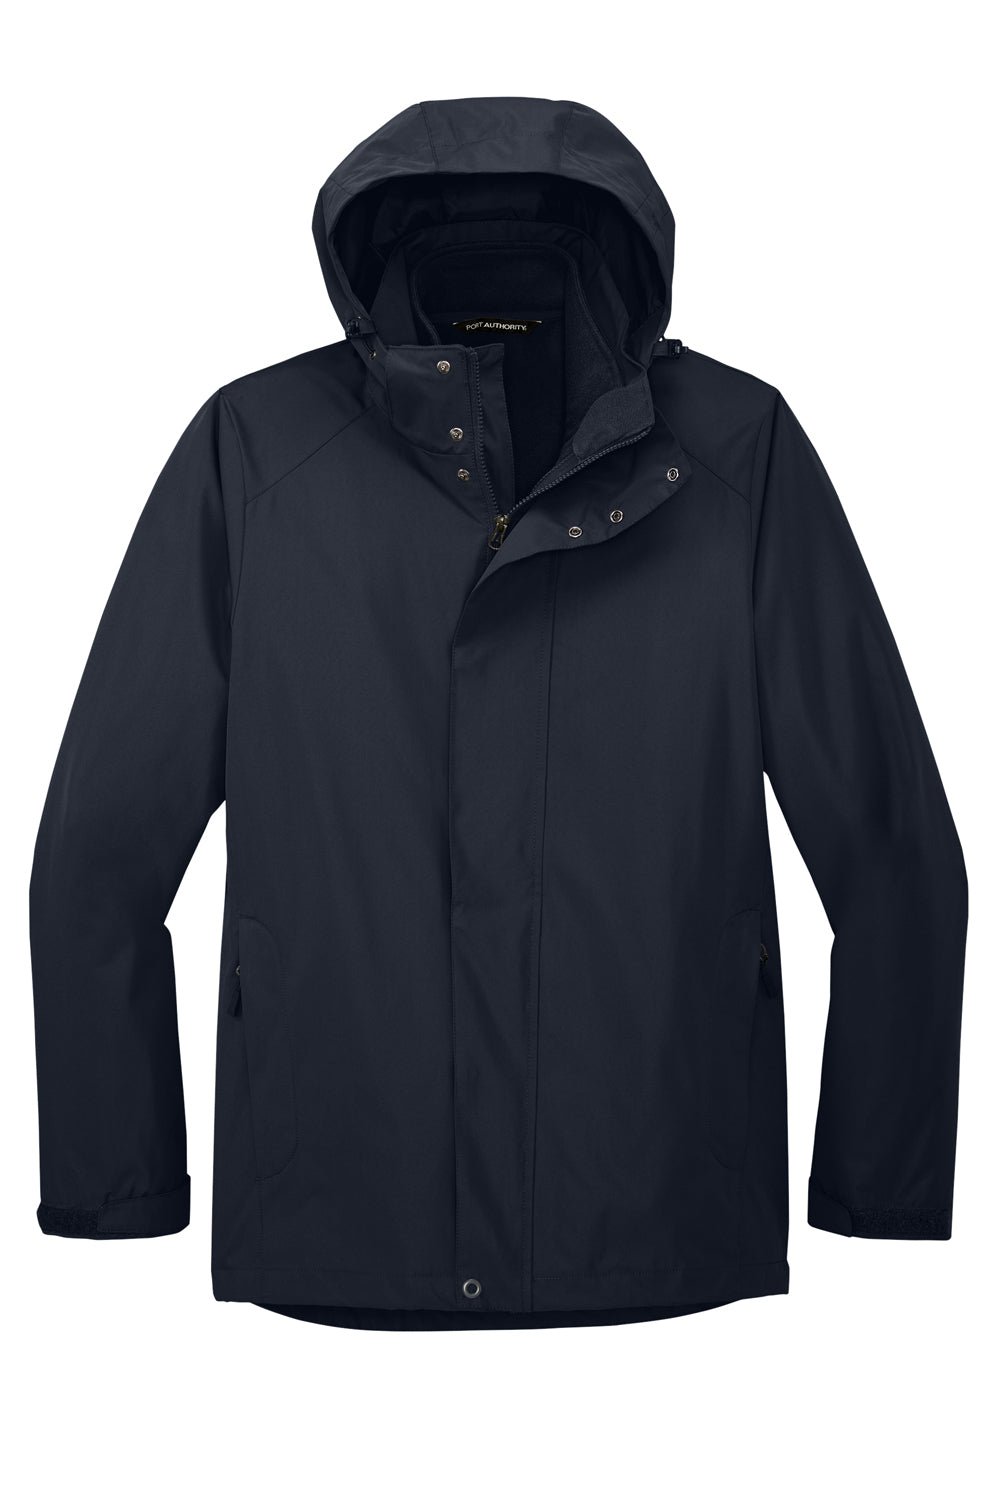 Port Authority J123 Mens All Weather 3 in 1 Full Zip Hooded Jacket River Navy Blue Flat Front